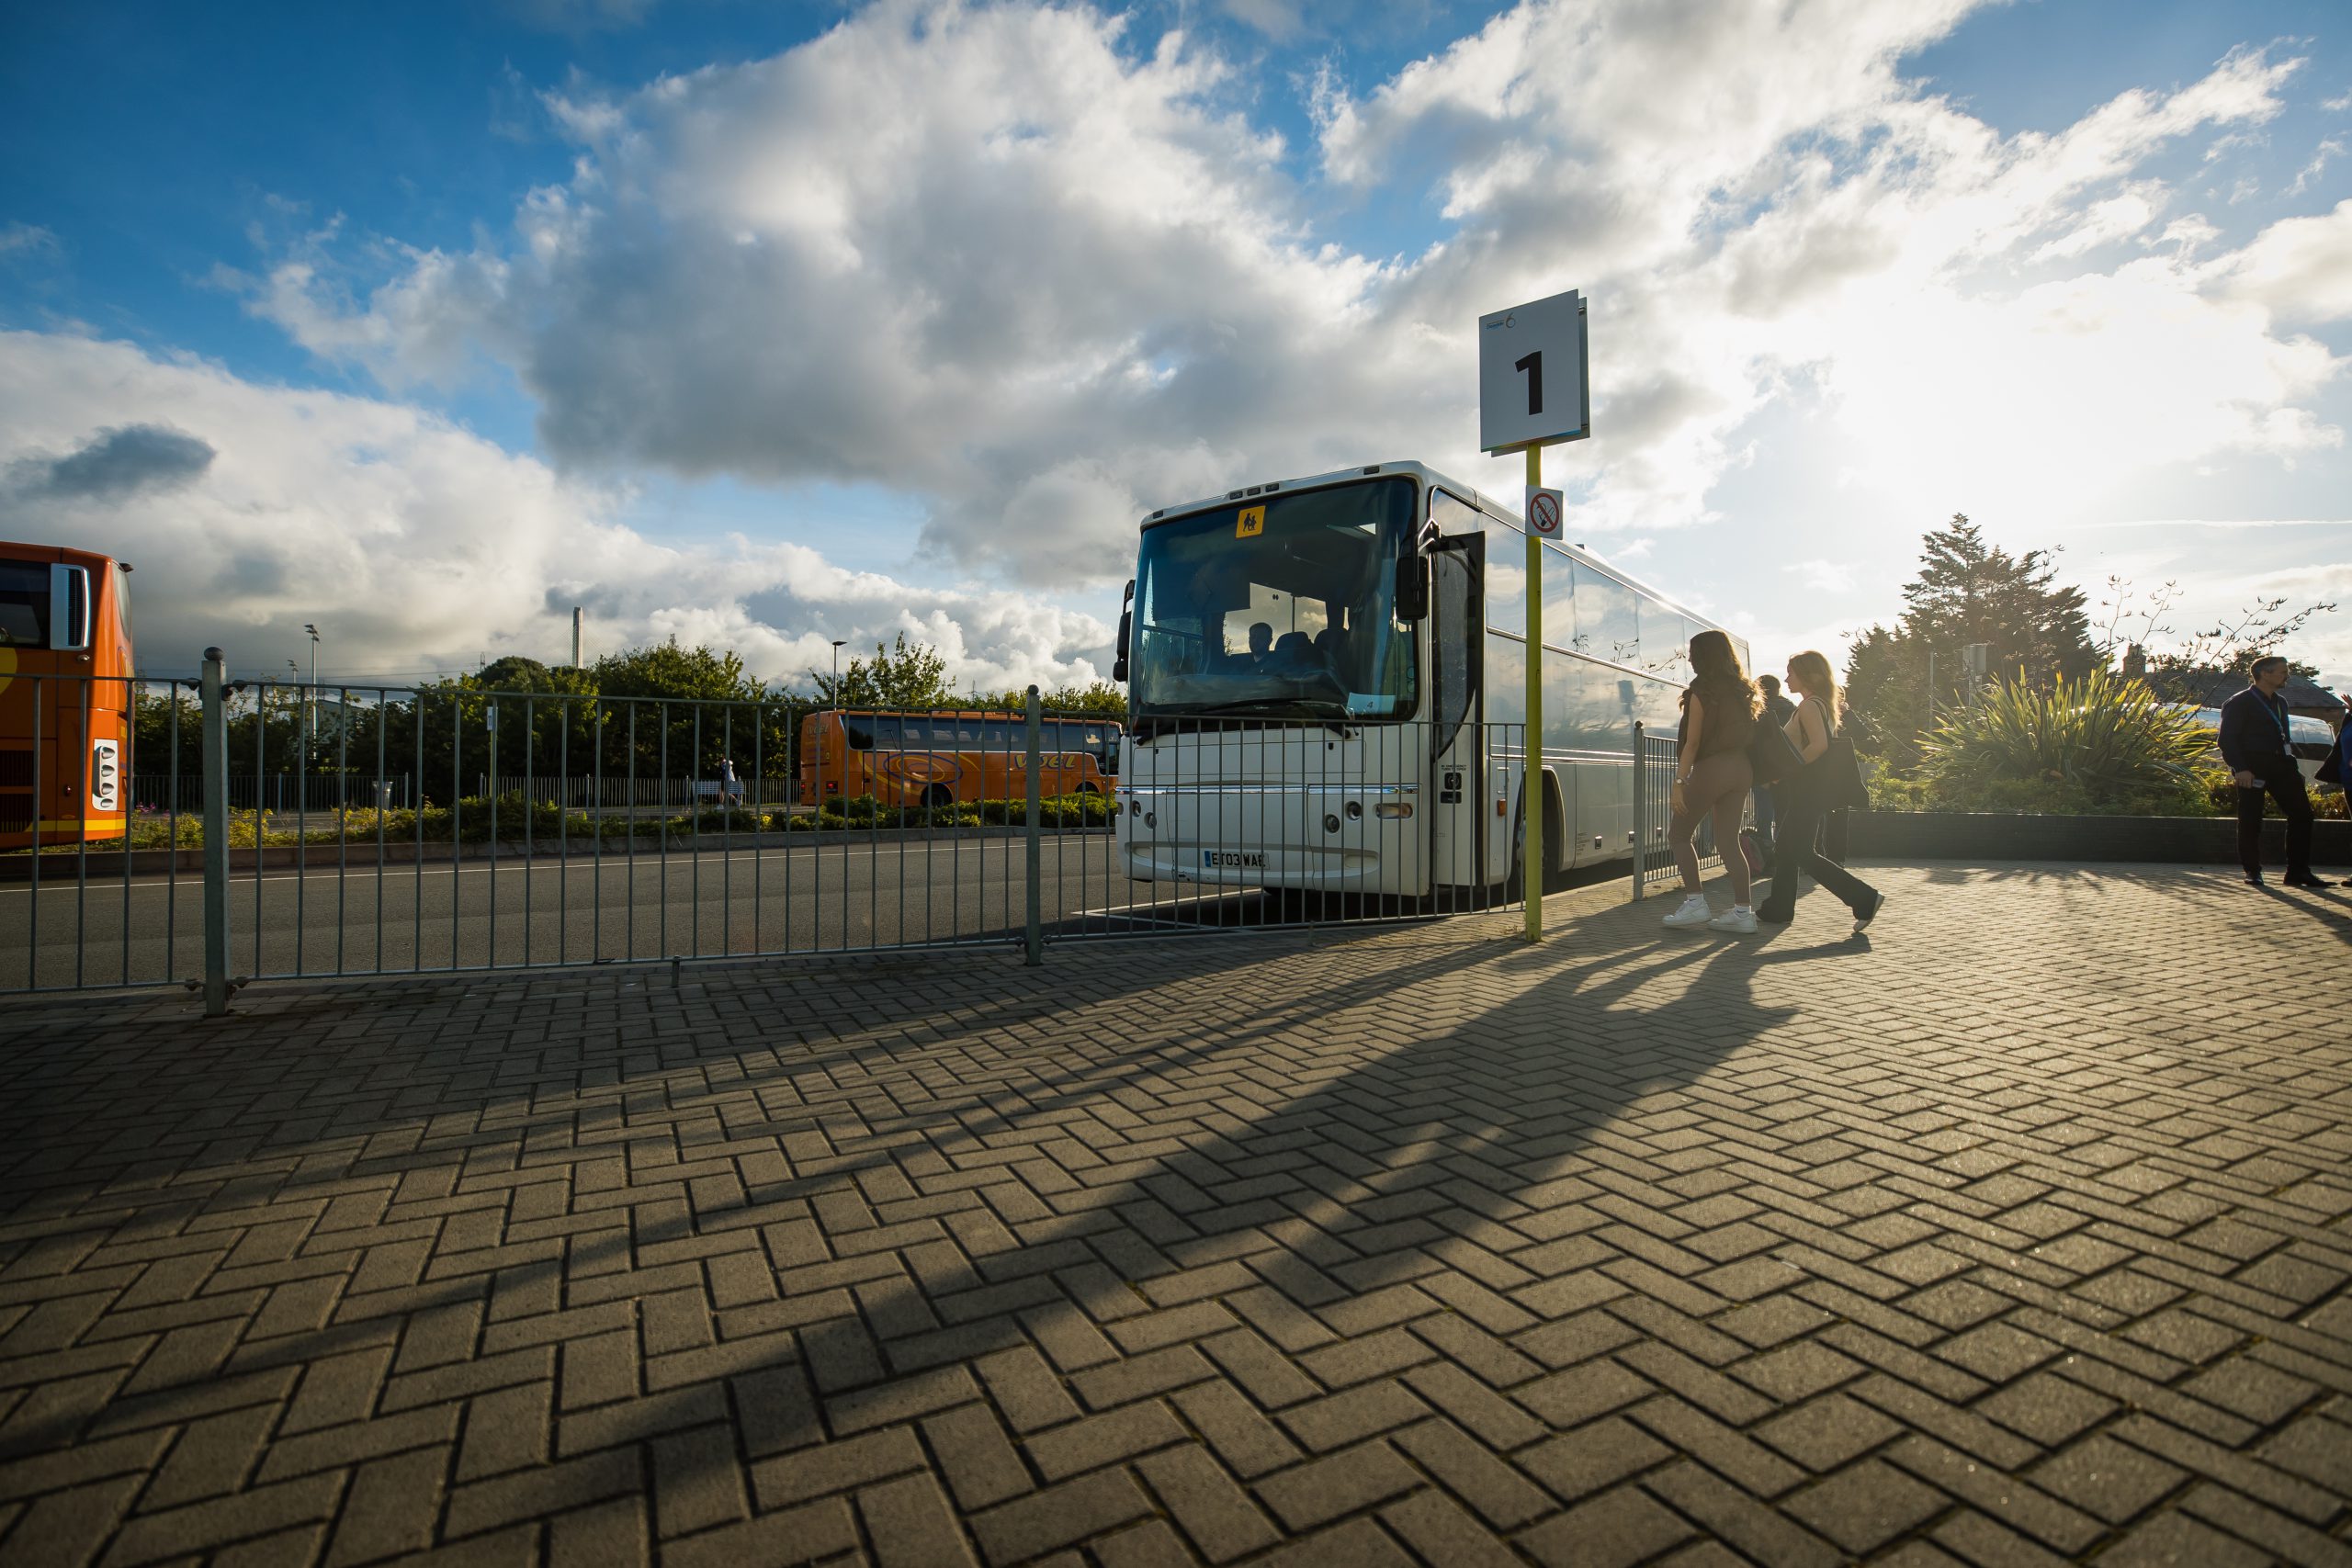 One of the buses at Deeside Sixth form with students entering to go home